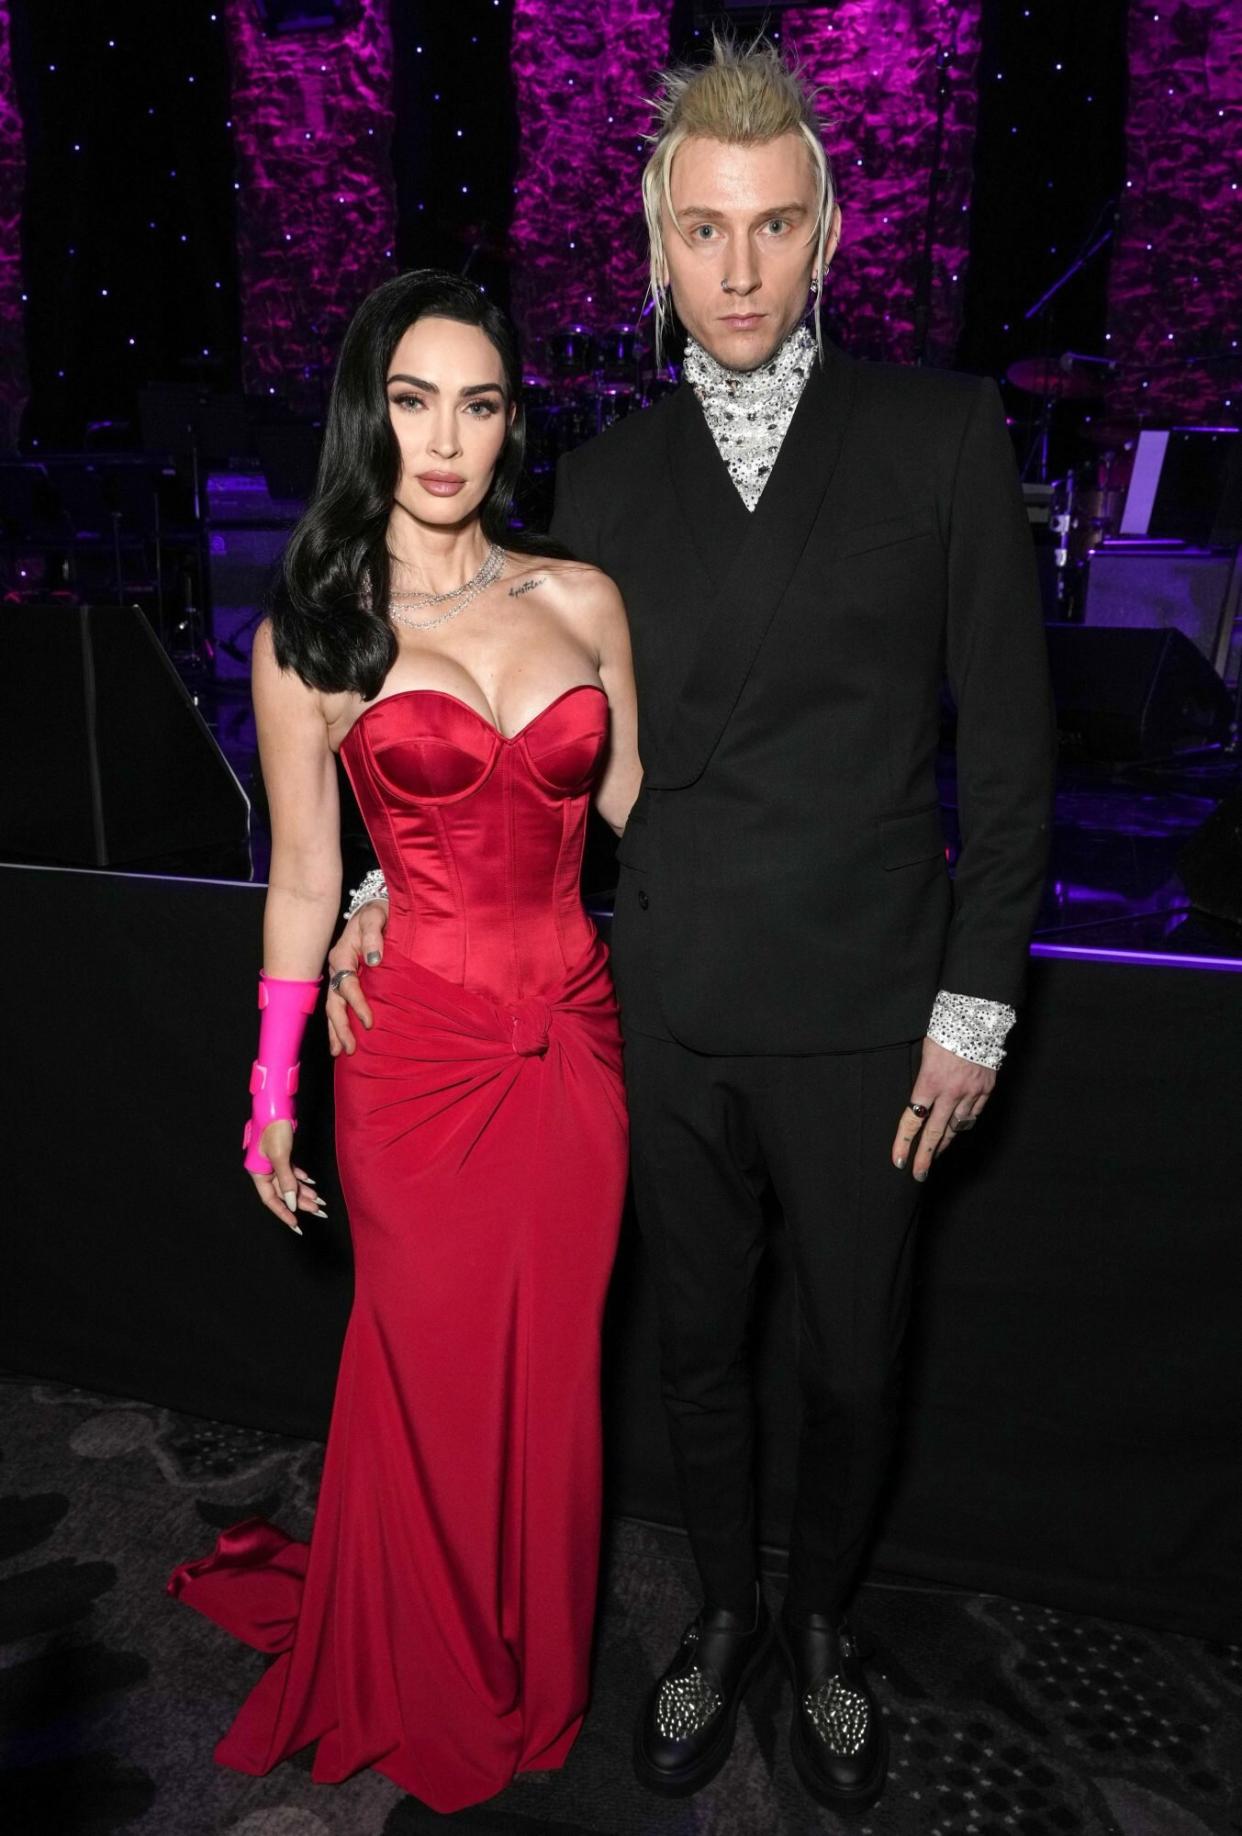 LOS ANGELES, CALIFORNIA - FEBRUARY 04: (L-R) Megan Fox ​and Machine Gun Kelly attend the Pre-GRAMMY Gala & GRAMMY Salute to Industry Icons Honoring Julie Greenwald and Craig Kallman on February 04, 2023 in Los Angeles, California. (Photo by Kevin Mazur/Getty Images for The Recording Academy)